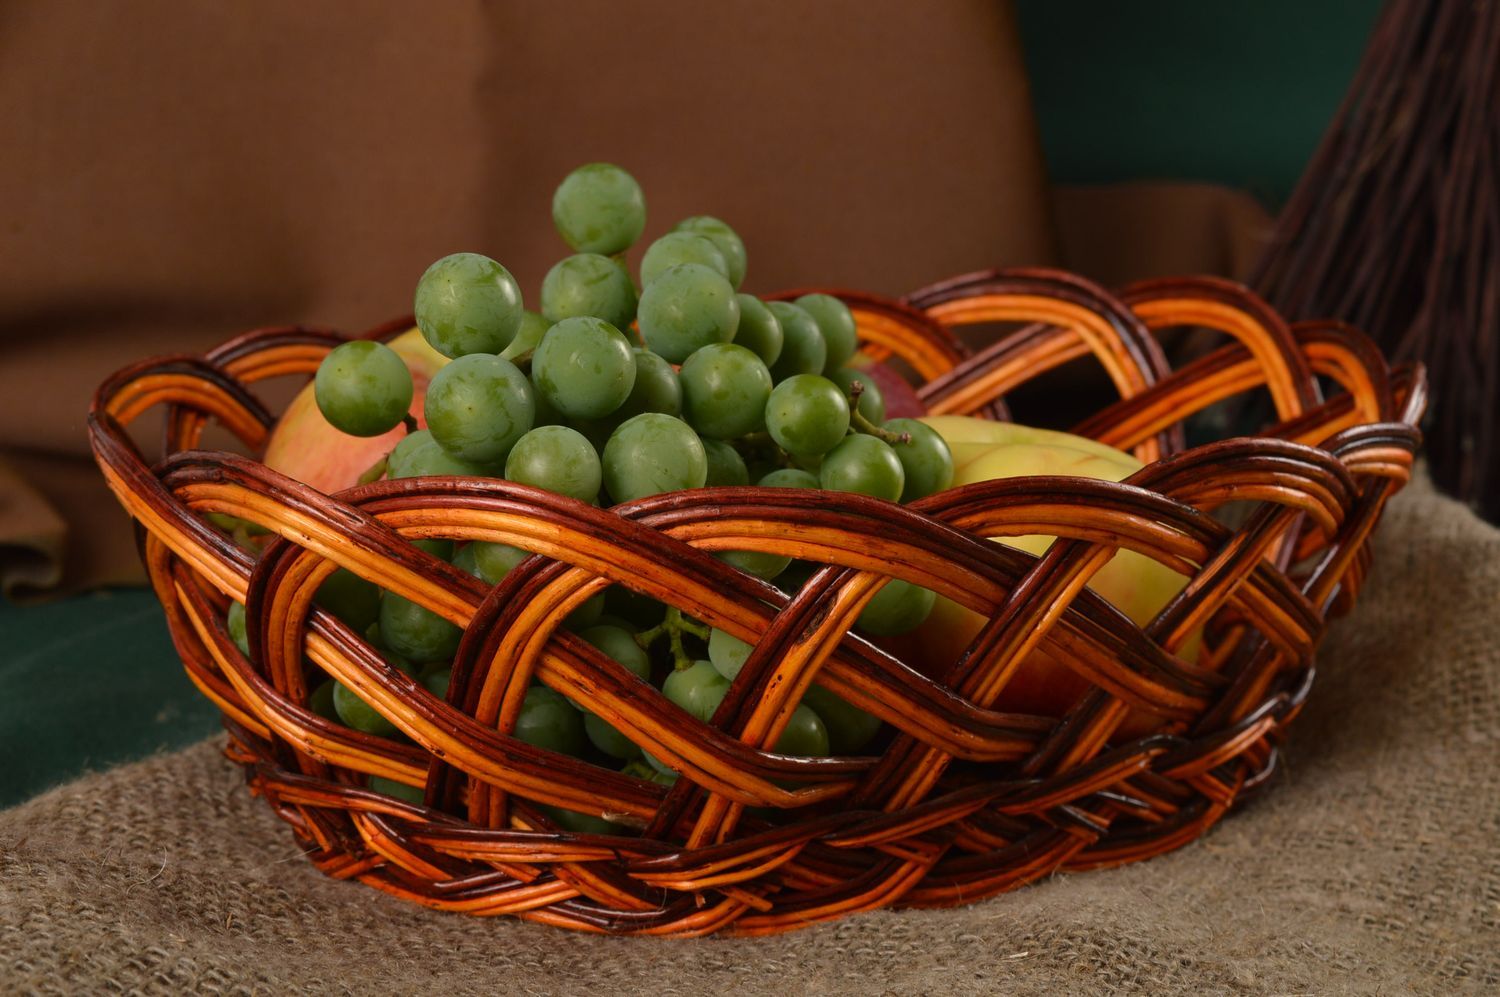 Handmade decor fruit bowl woven vase candy bowl home ideas decorative use only photo 1